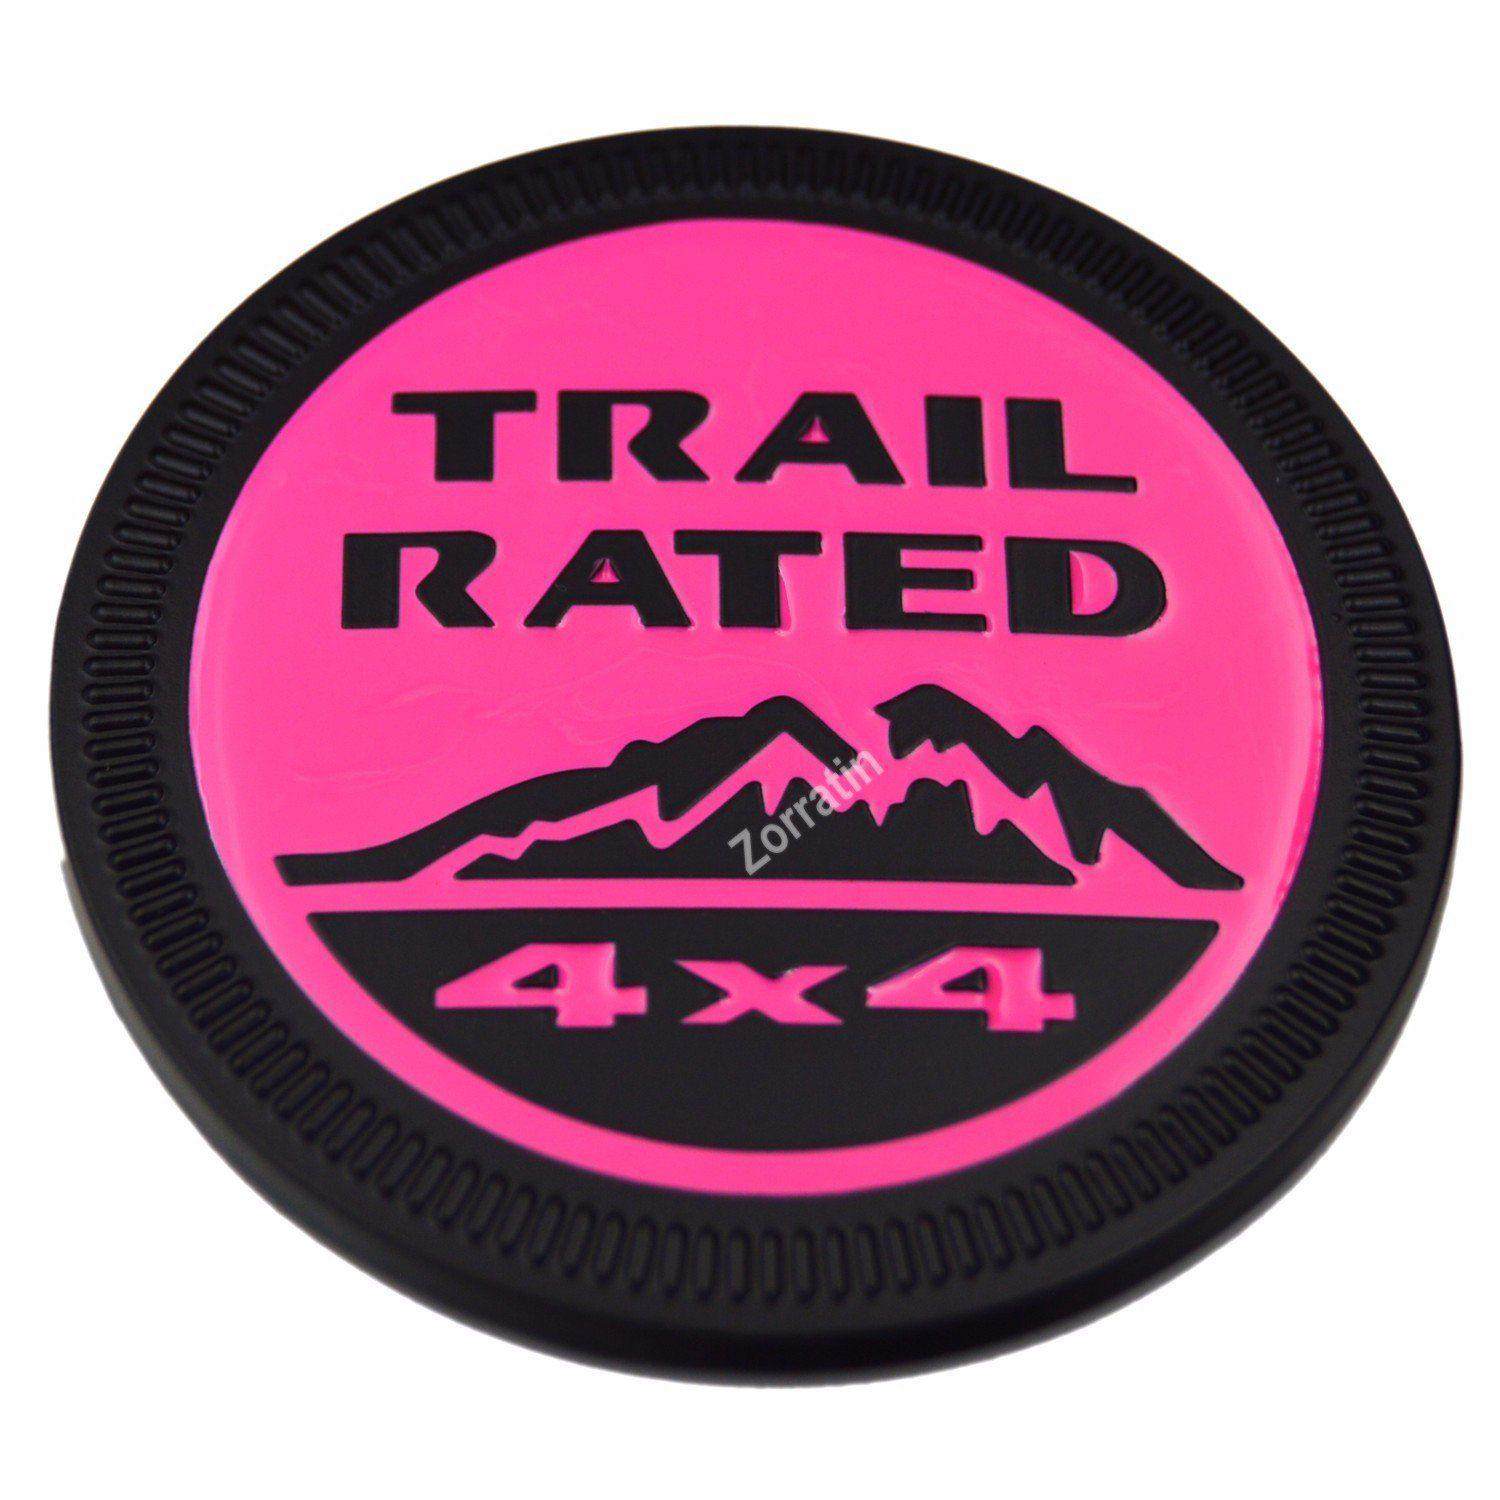 Pink Jeep Logo - Amazon.com: zorratin Metal Trail Rated 4x4 Round Emblem Badge for ...